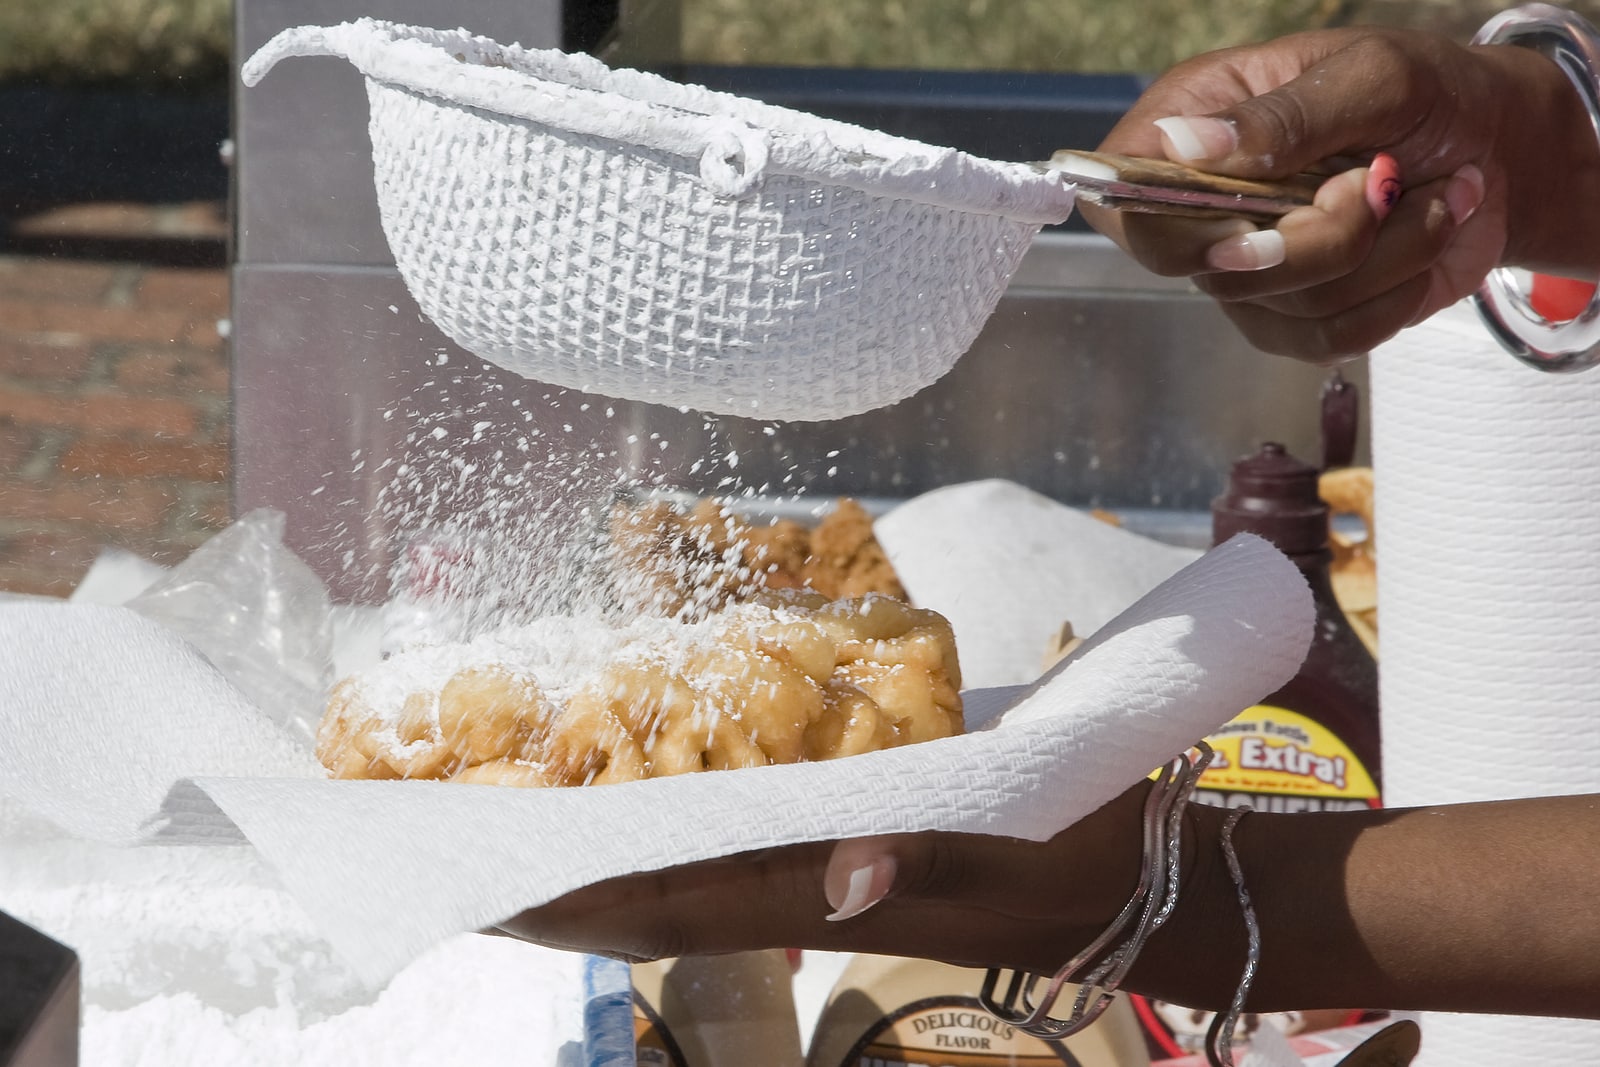 Young lady making fresh funnel cakes popular at fair time and other gatherings.